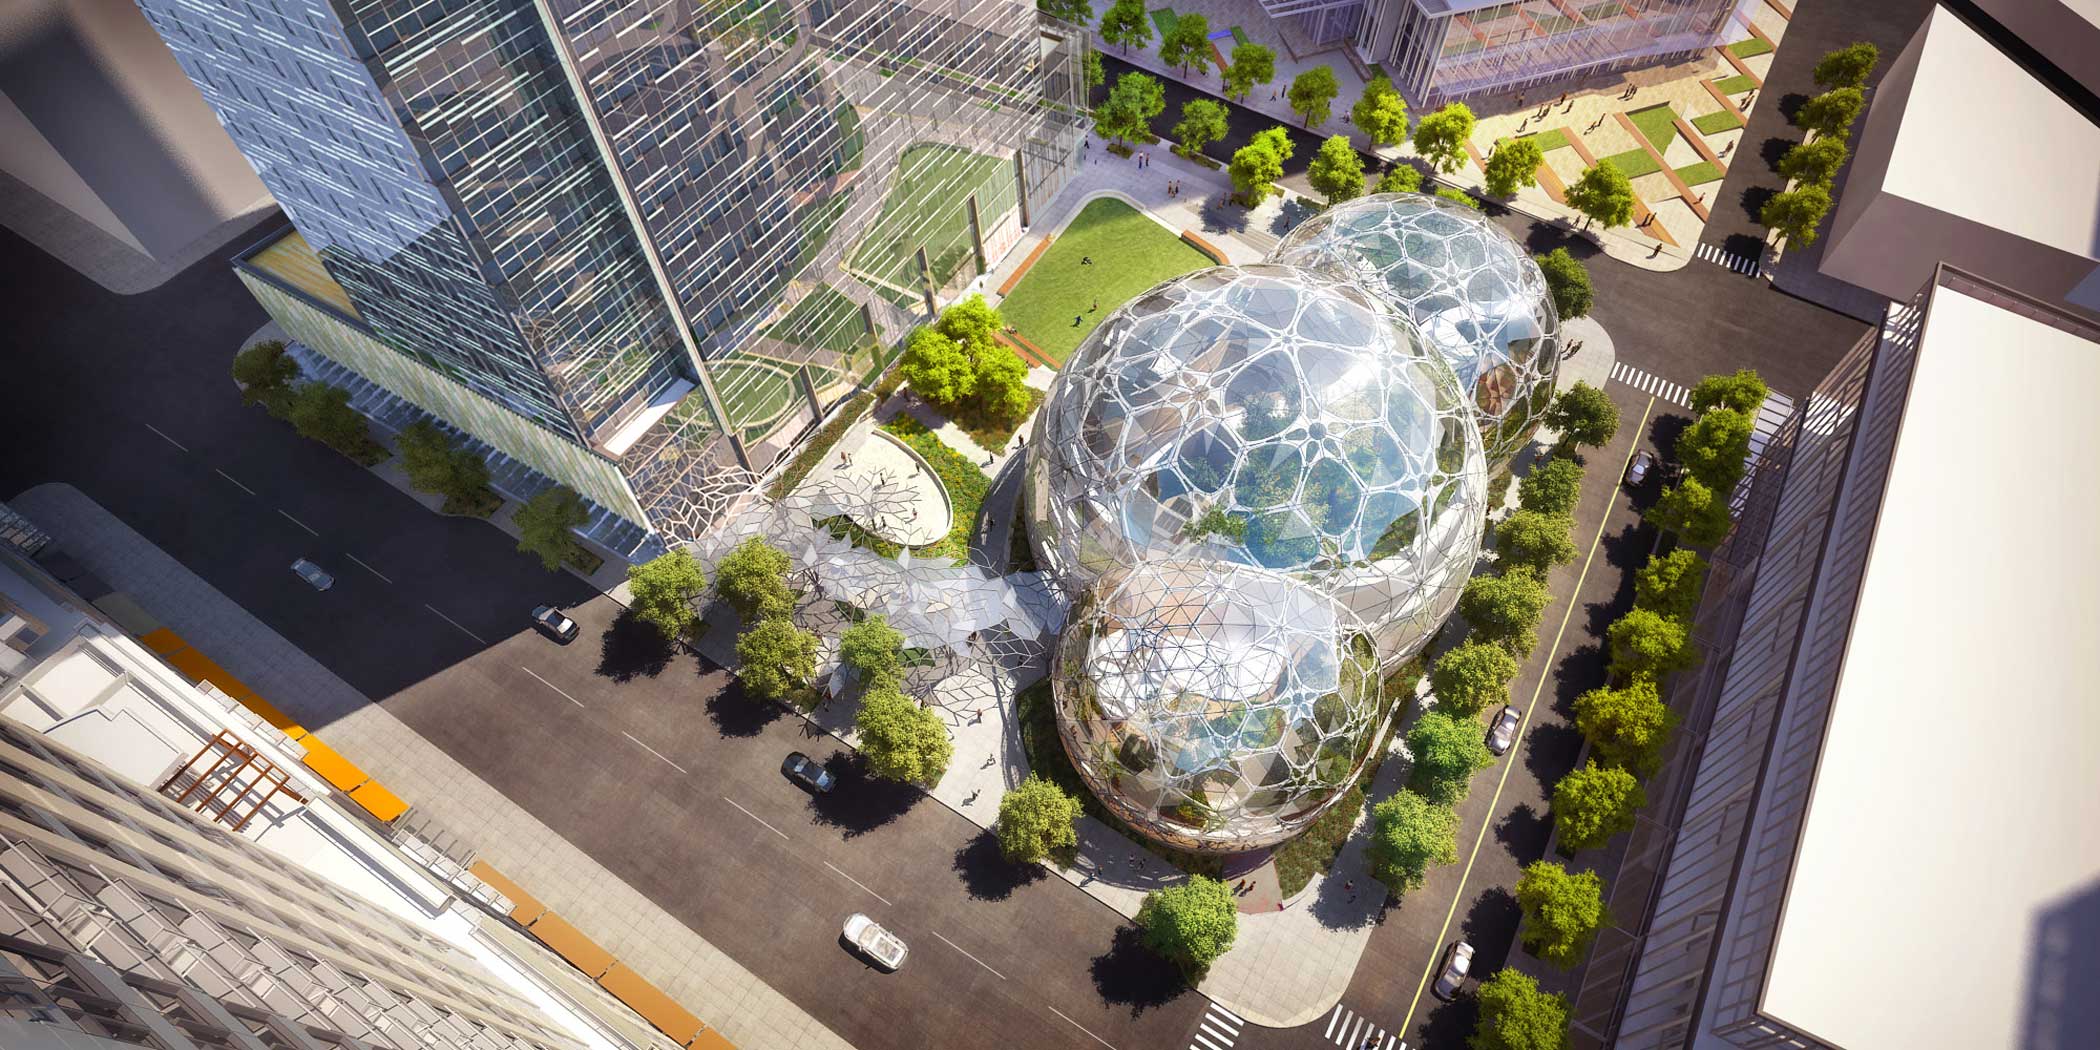 Amazon Seattle, Wash., Three 38-story office towers in an underdeveloped downtown area will be built around glass bio-domes.